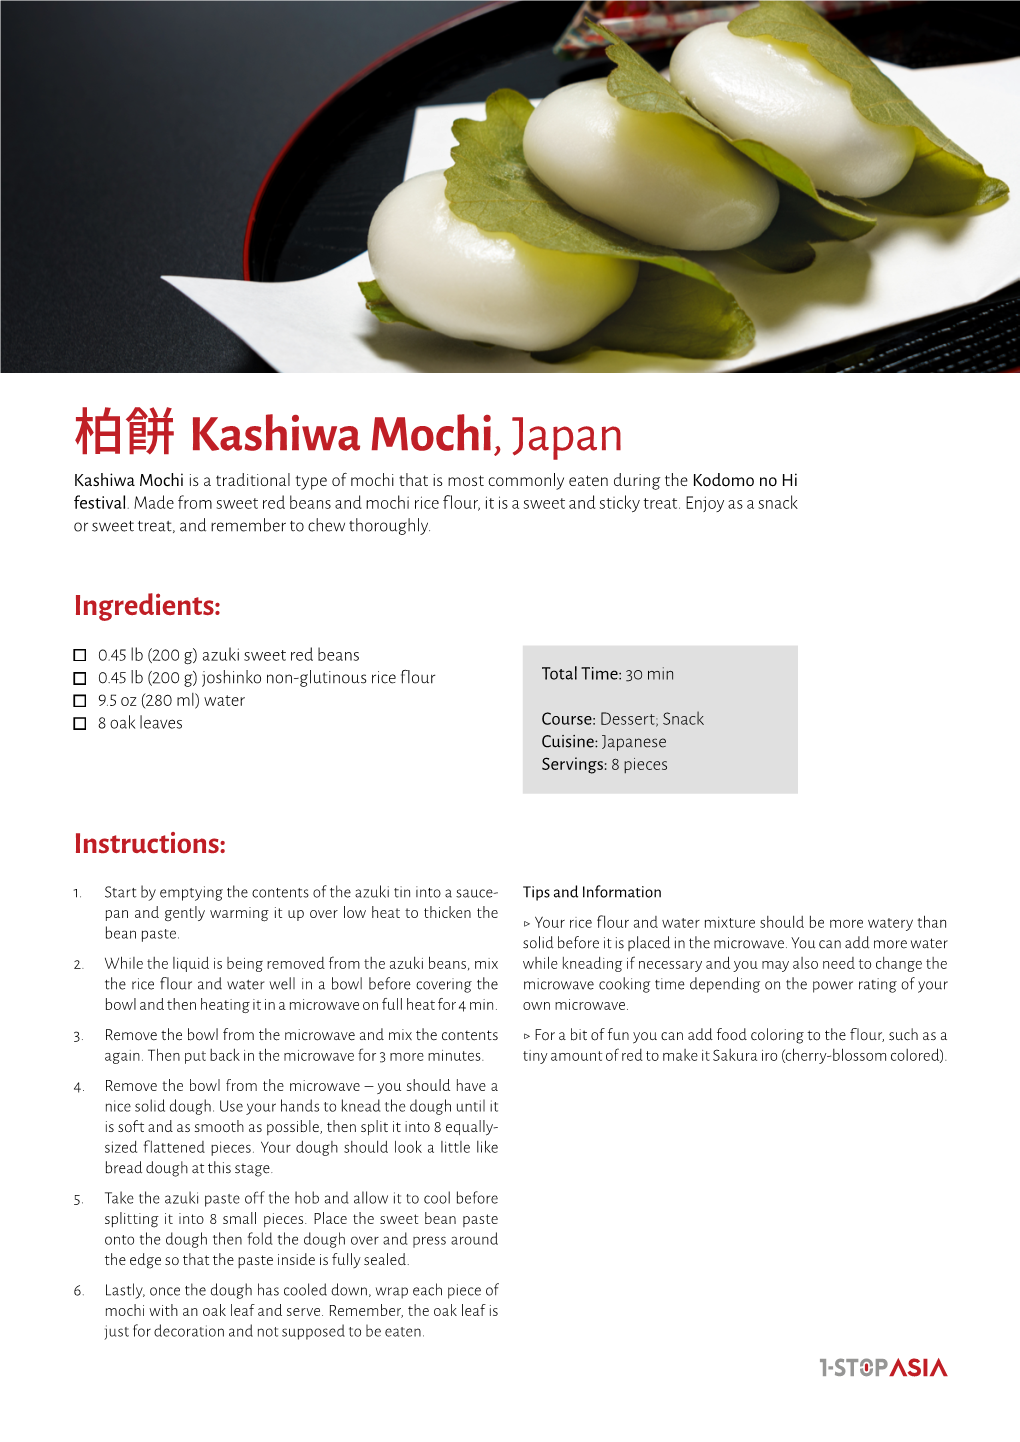 Kashiwa Mochi, Japan 柏餅kashiwa Mochi Is a Traditional Type of Mochi That Is Most Commonly Eaten During the Kodomo No Hi Festival